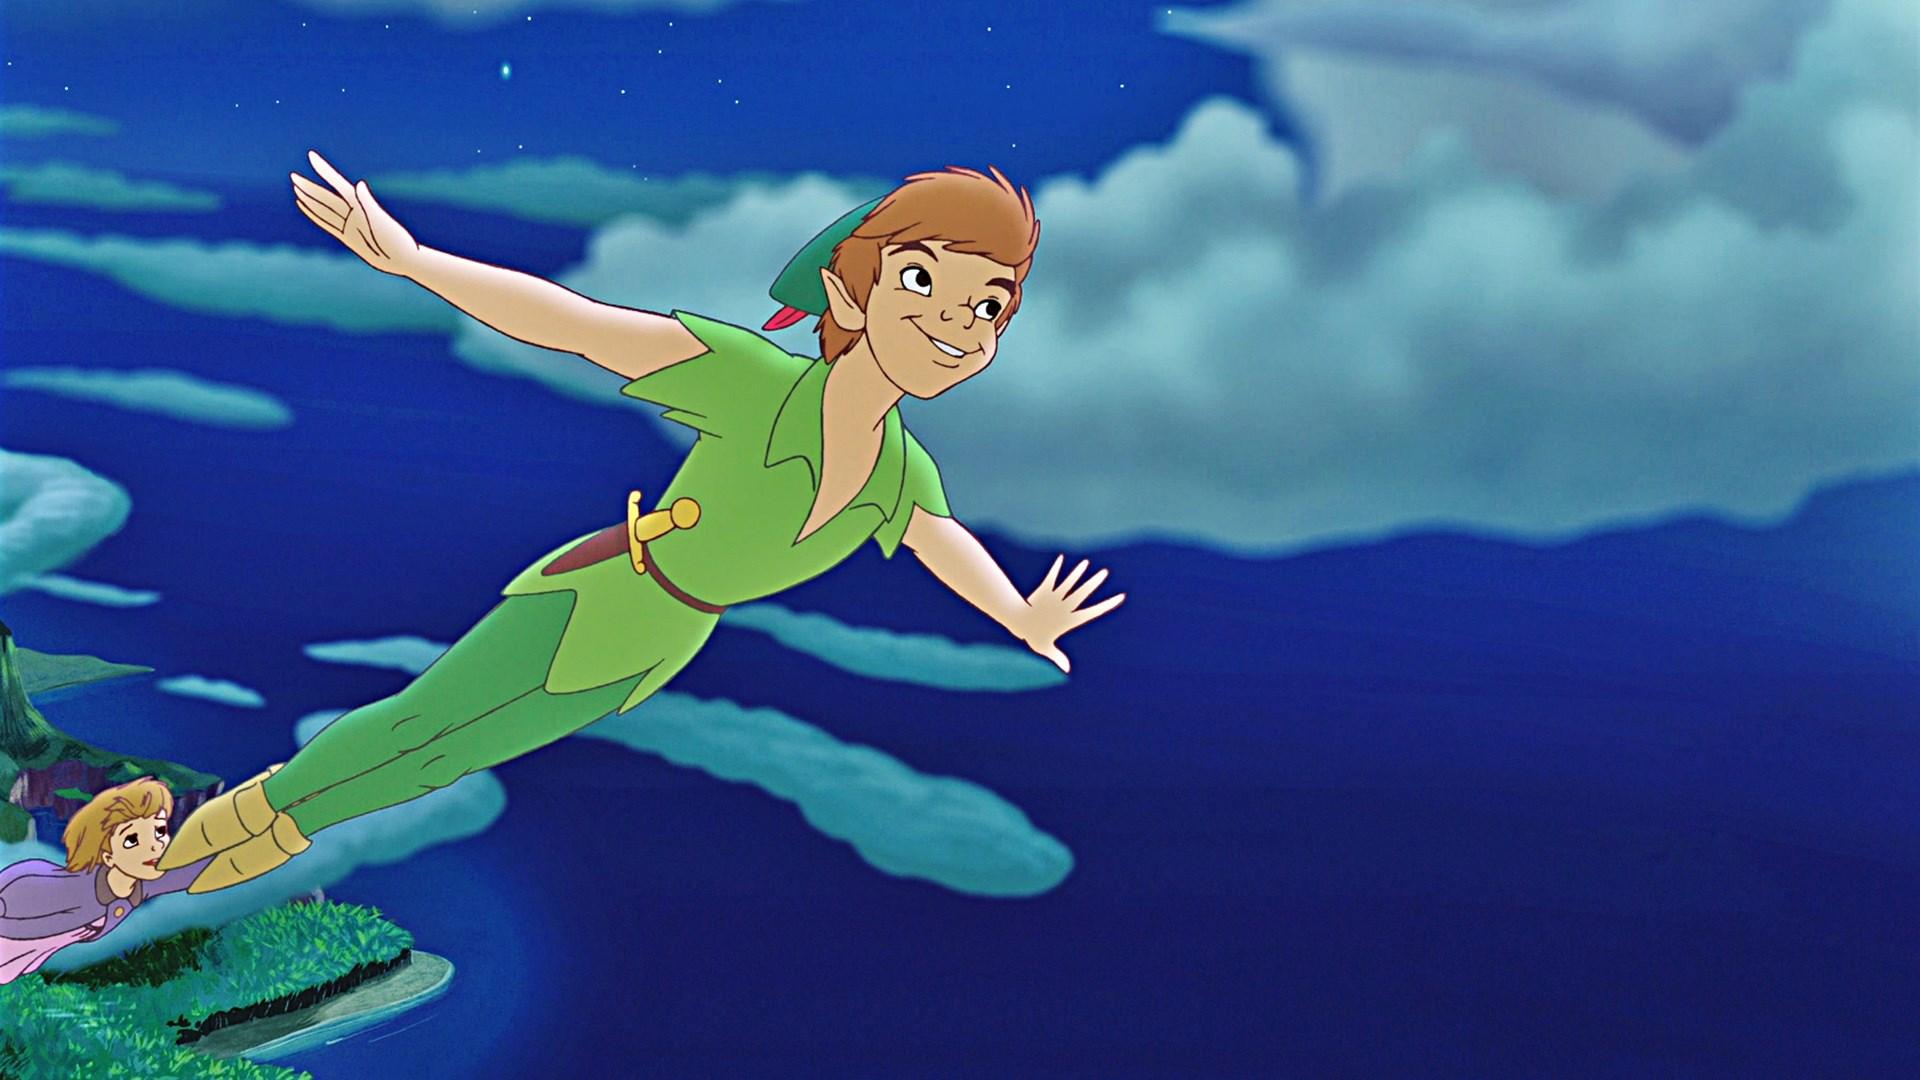 peter pan, wendy 4k wallpaper and background. Free stock